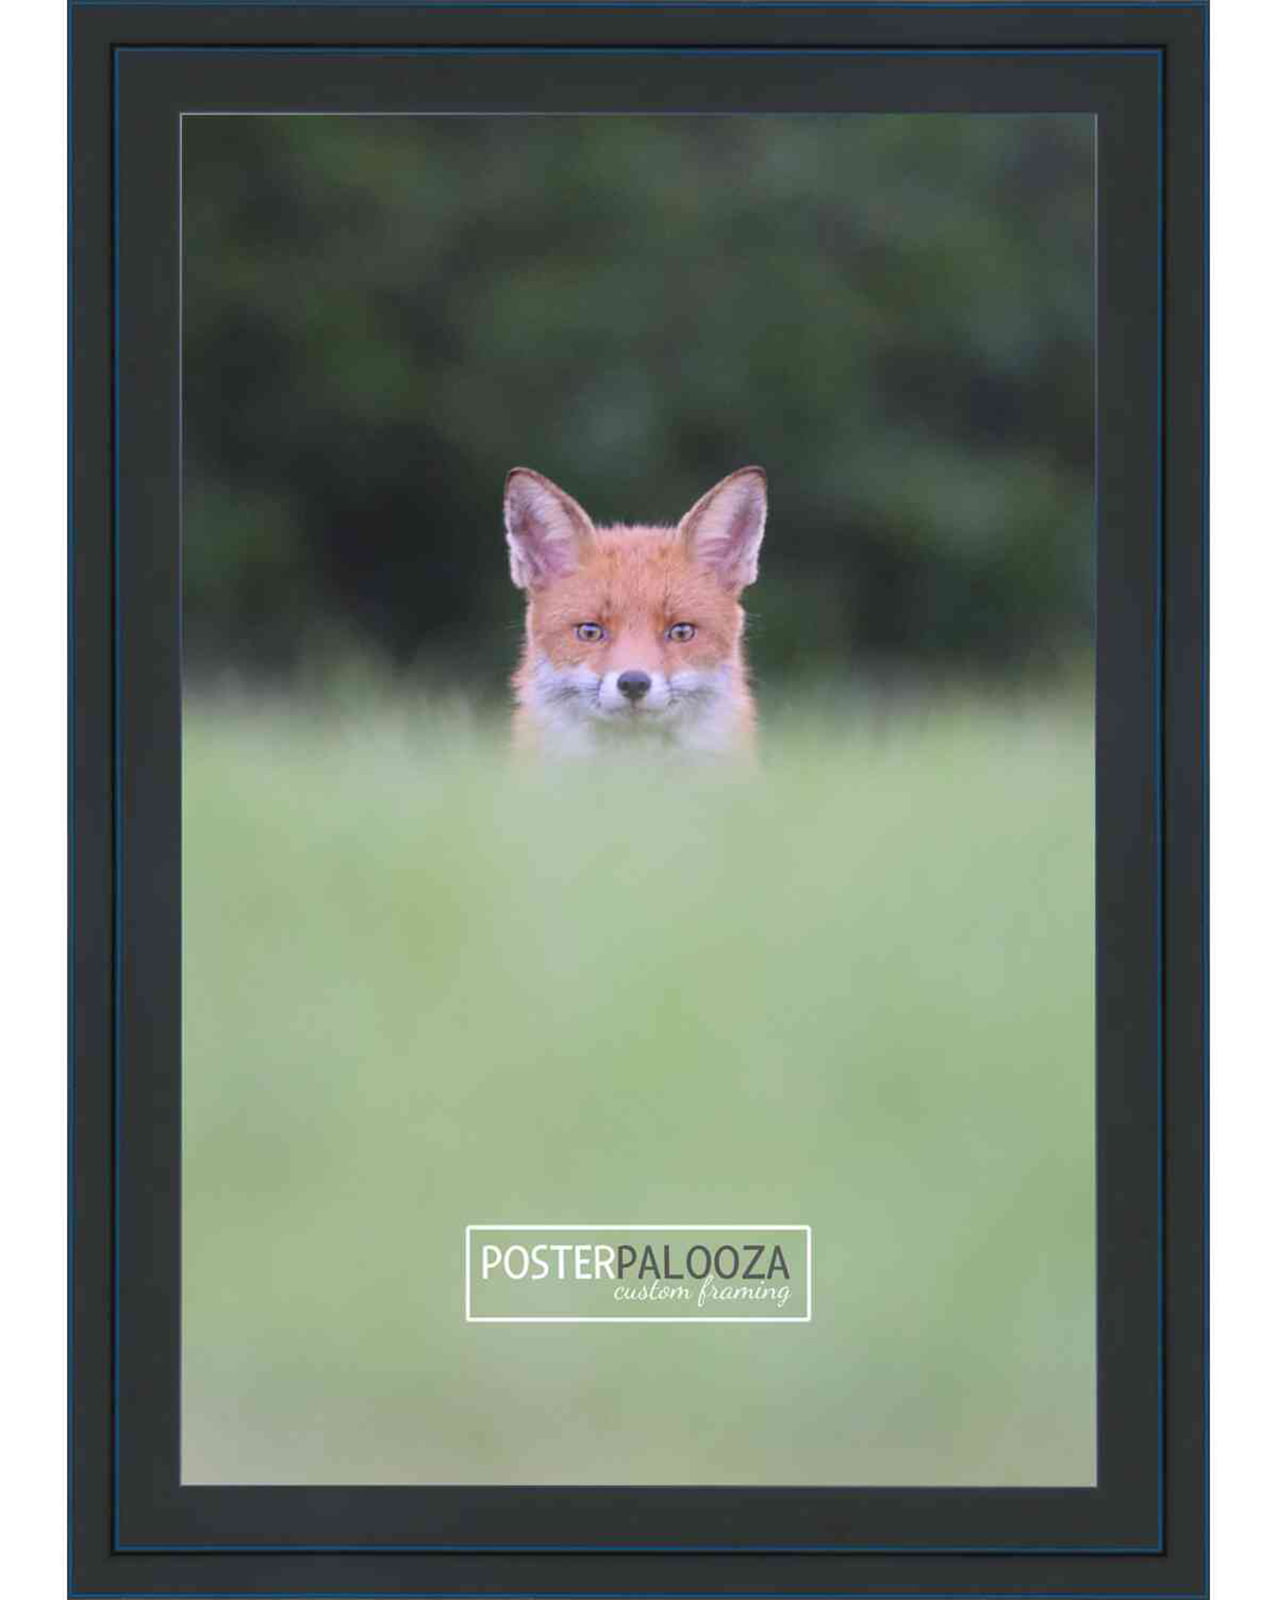 26x36 Black Wood Picture Frame With Acrylic Front and Foam Board Backing 